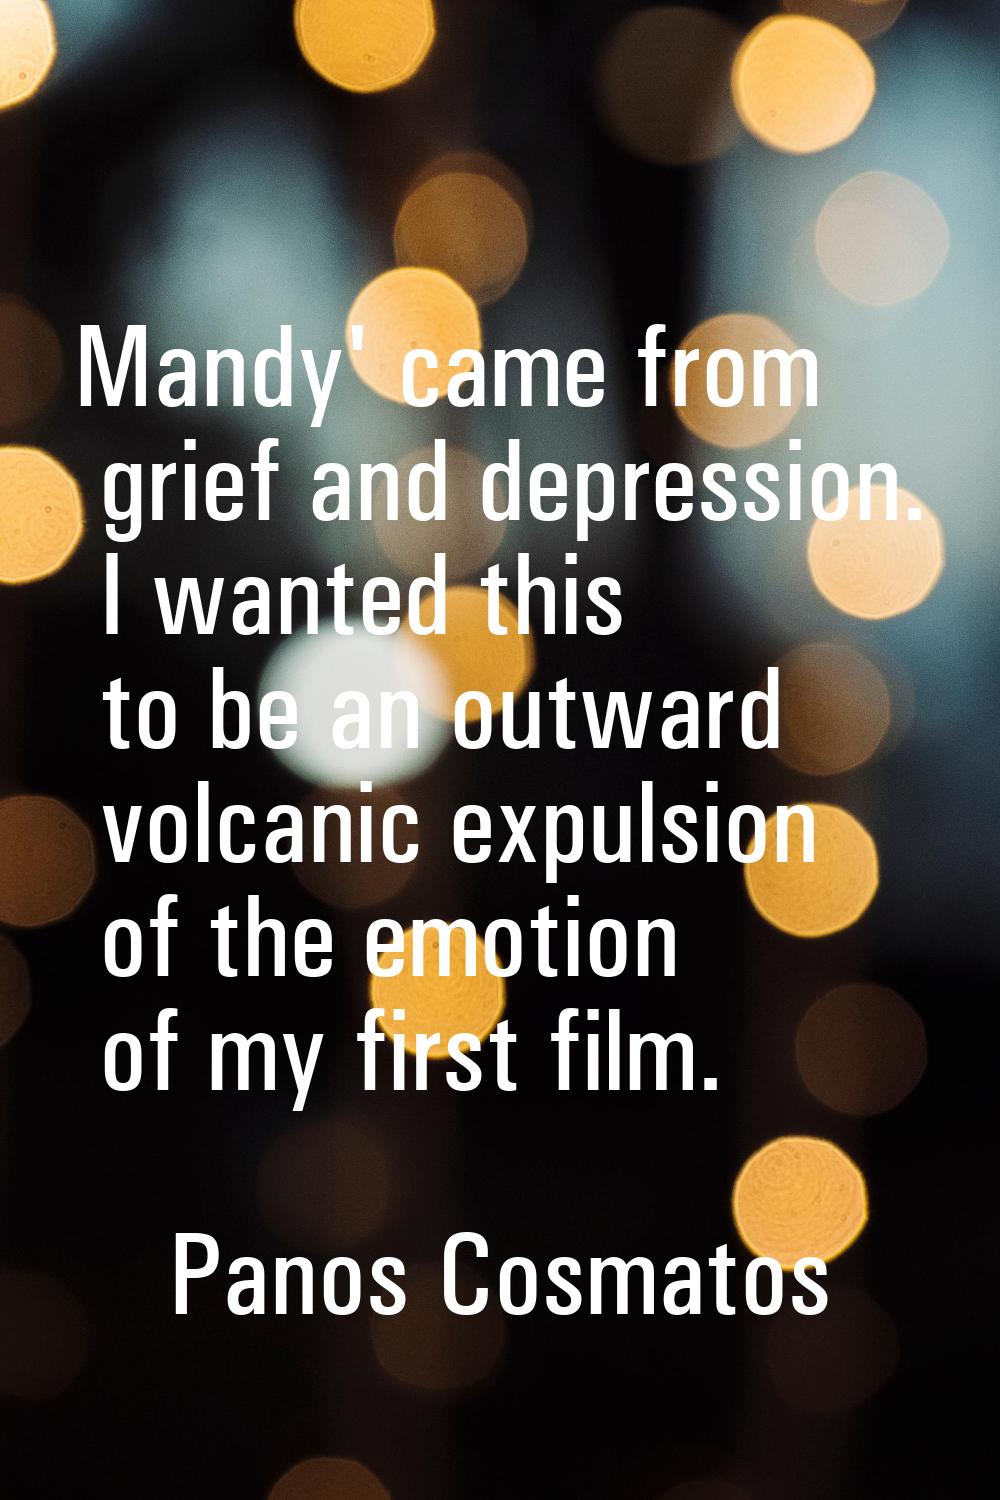 Mandy' came from grief and depression. I wanted this to be an outward volcanic expulsion of the emo